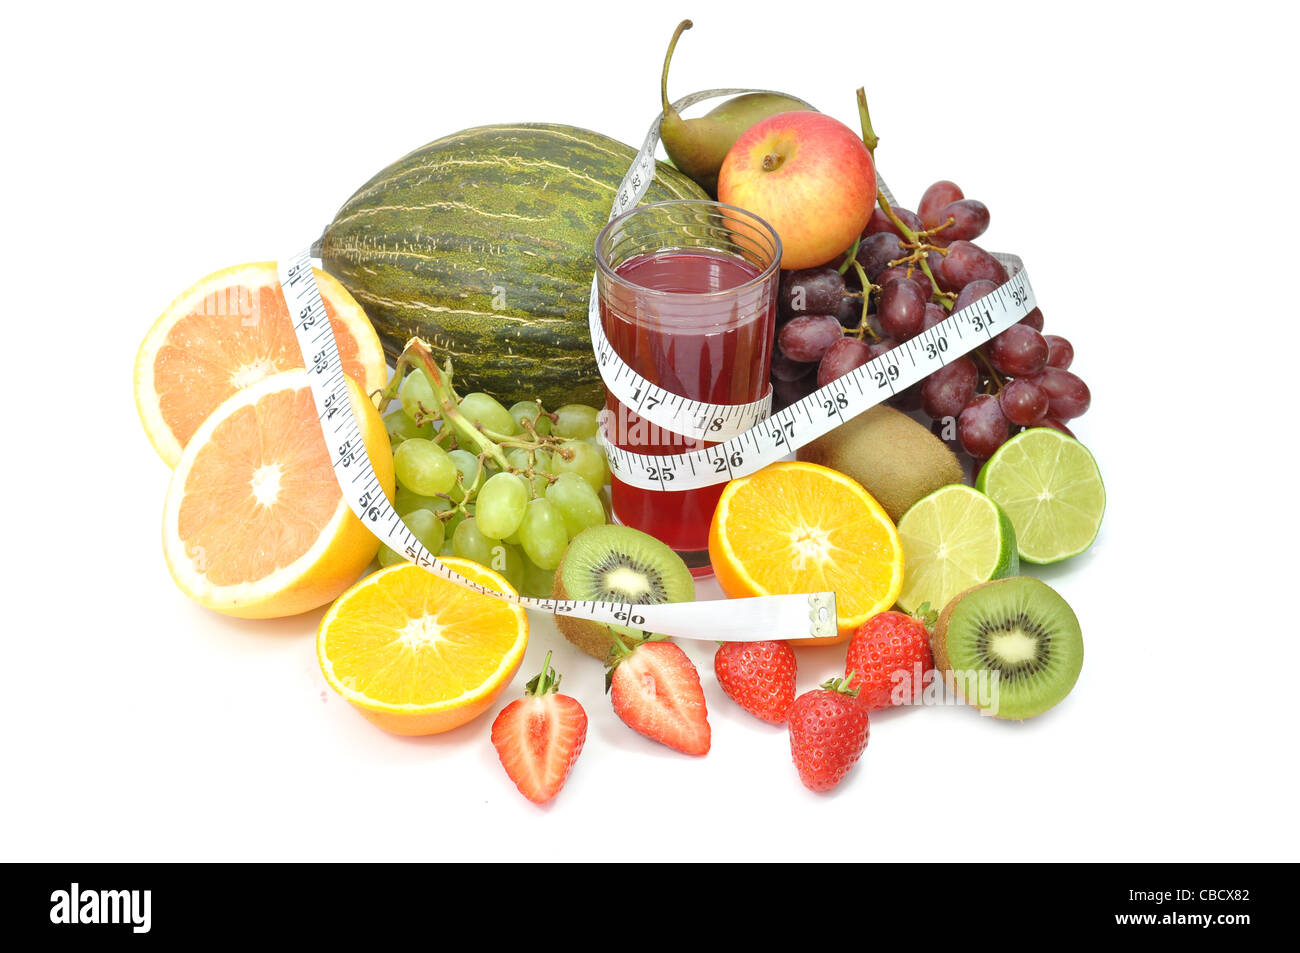 Fresh glass of juice surrounded by an assortment of fruit and a tape measure Stock Photo